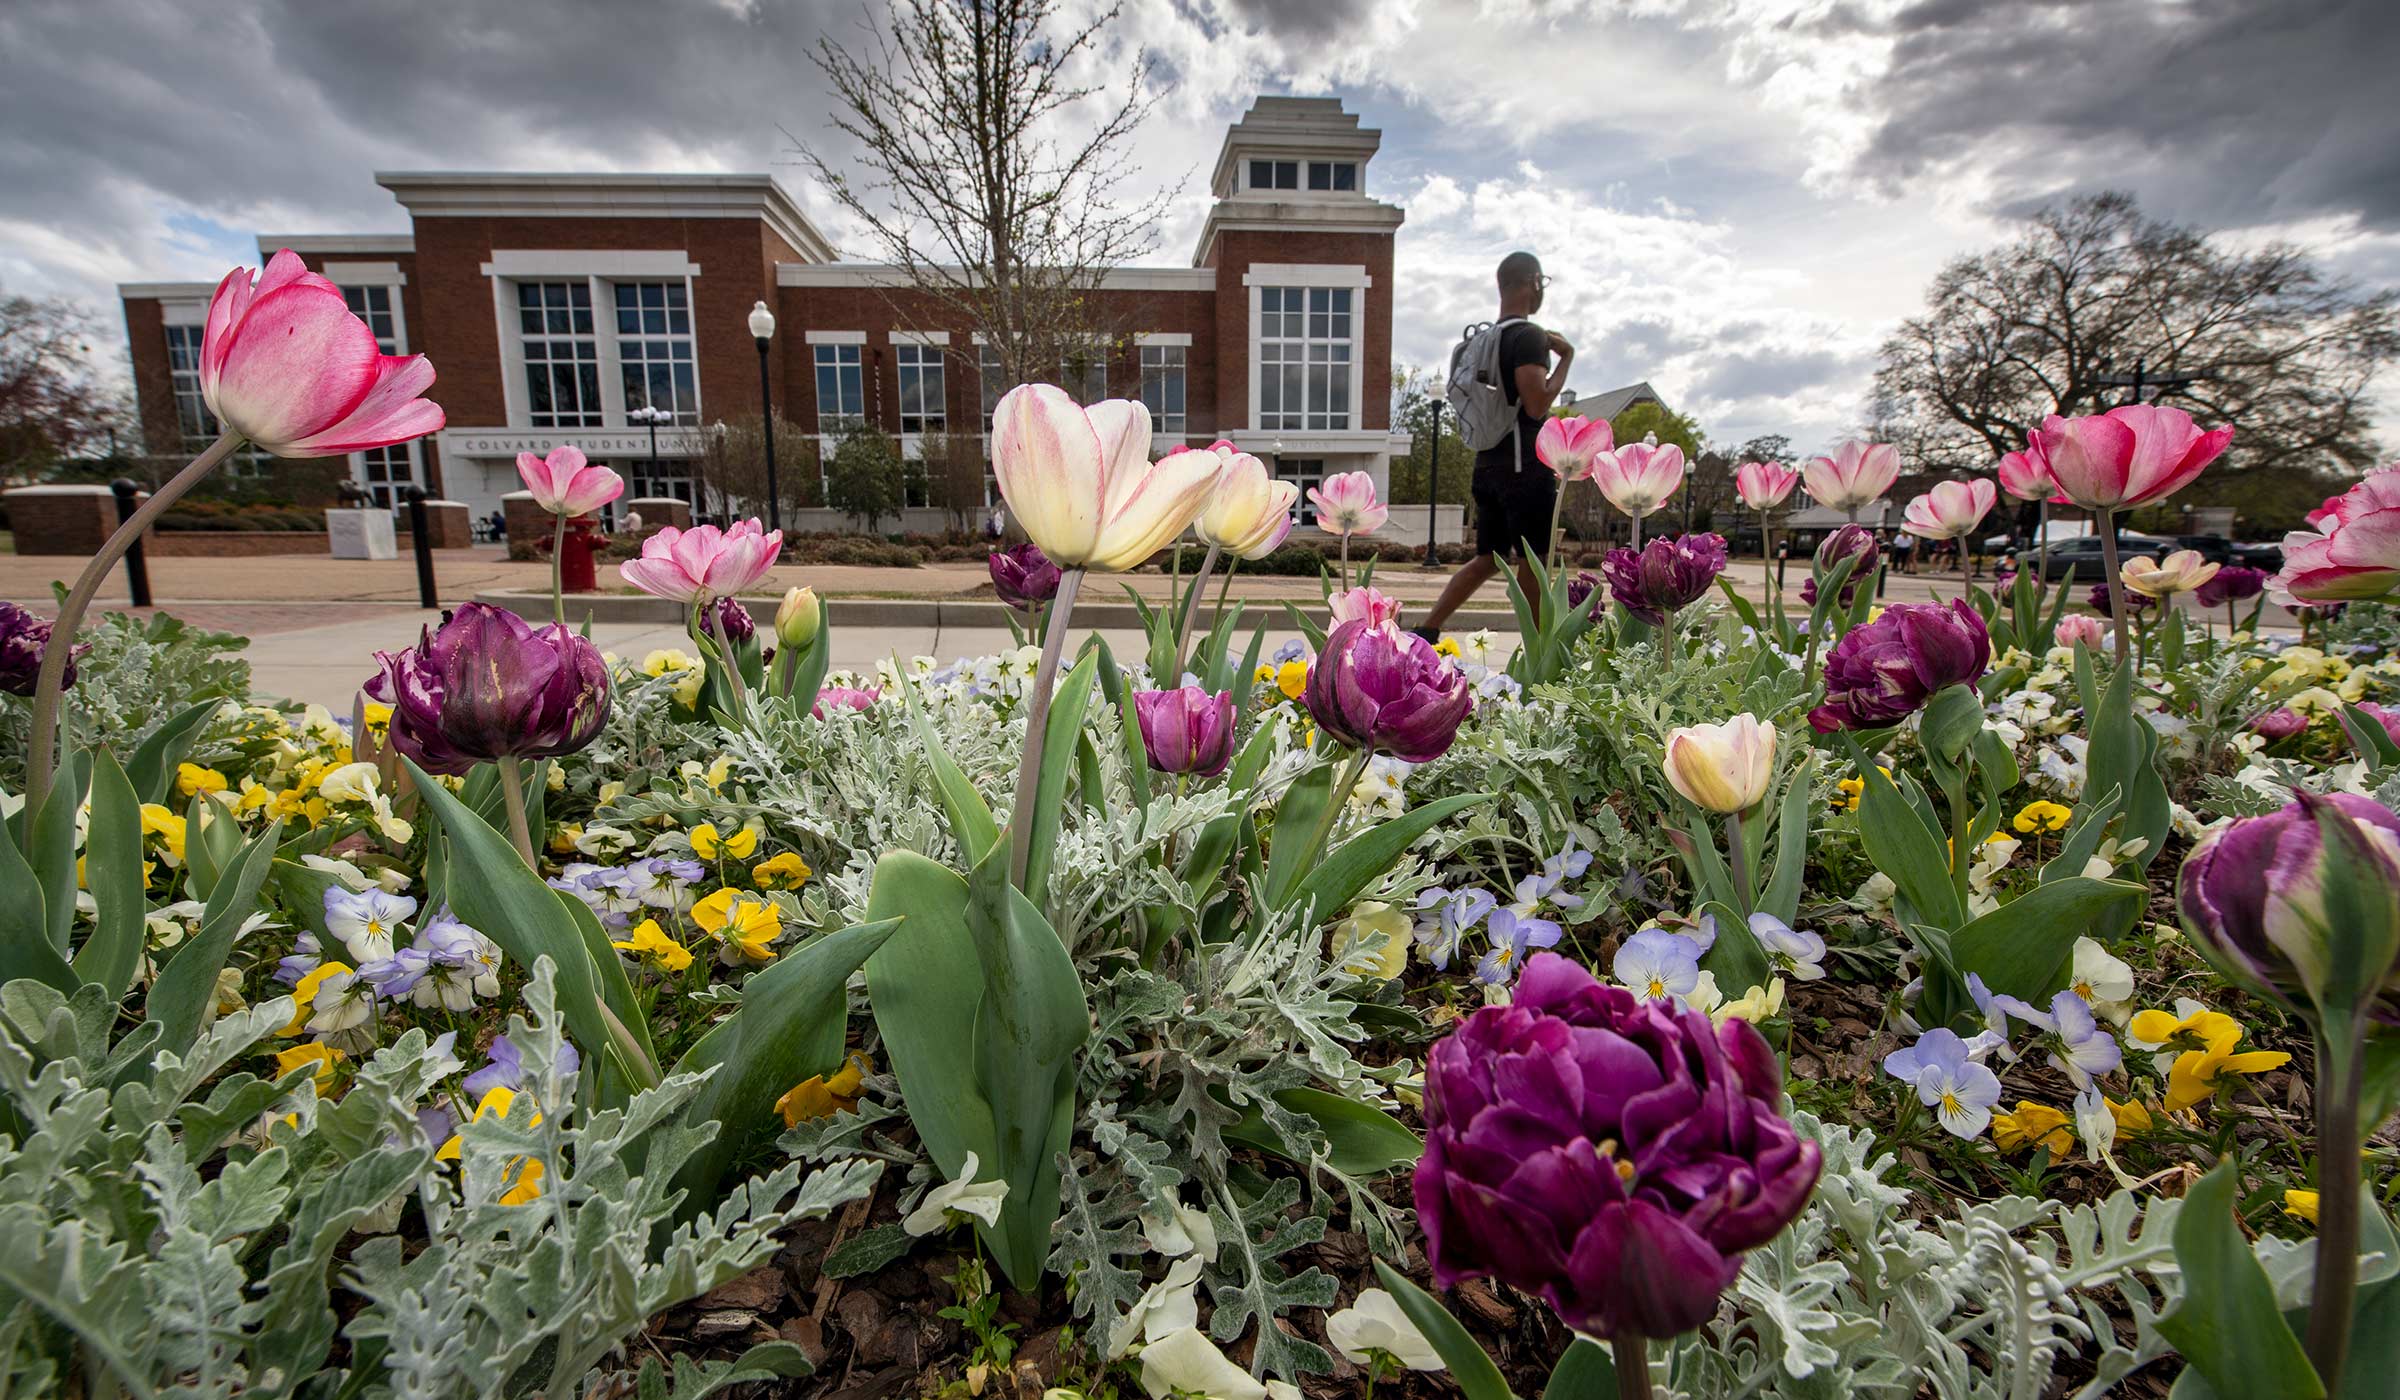 An array of colorful spring tulips in the foreground, with a dramatic cloudy sky and Colvard Union beyond.